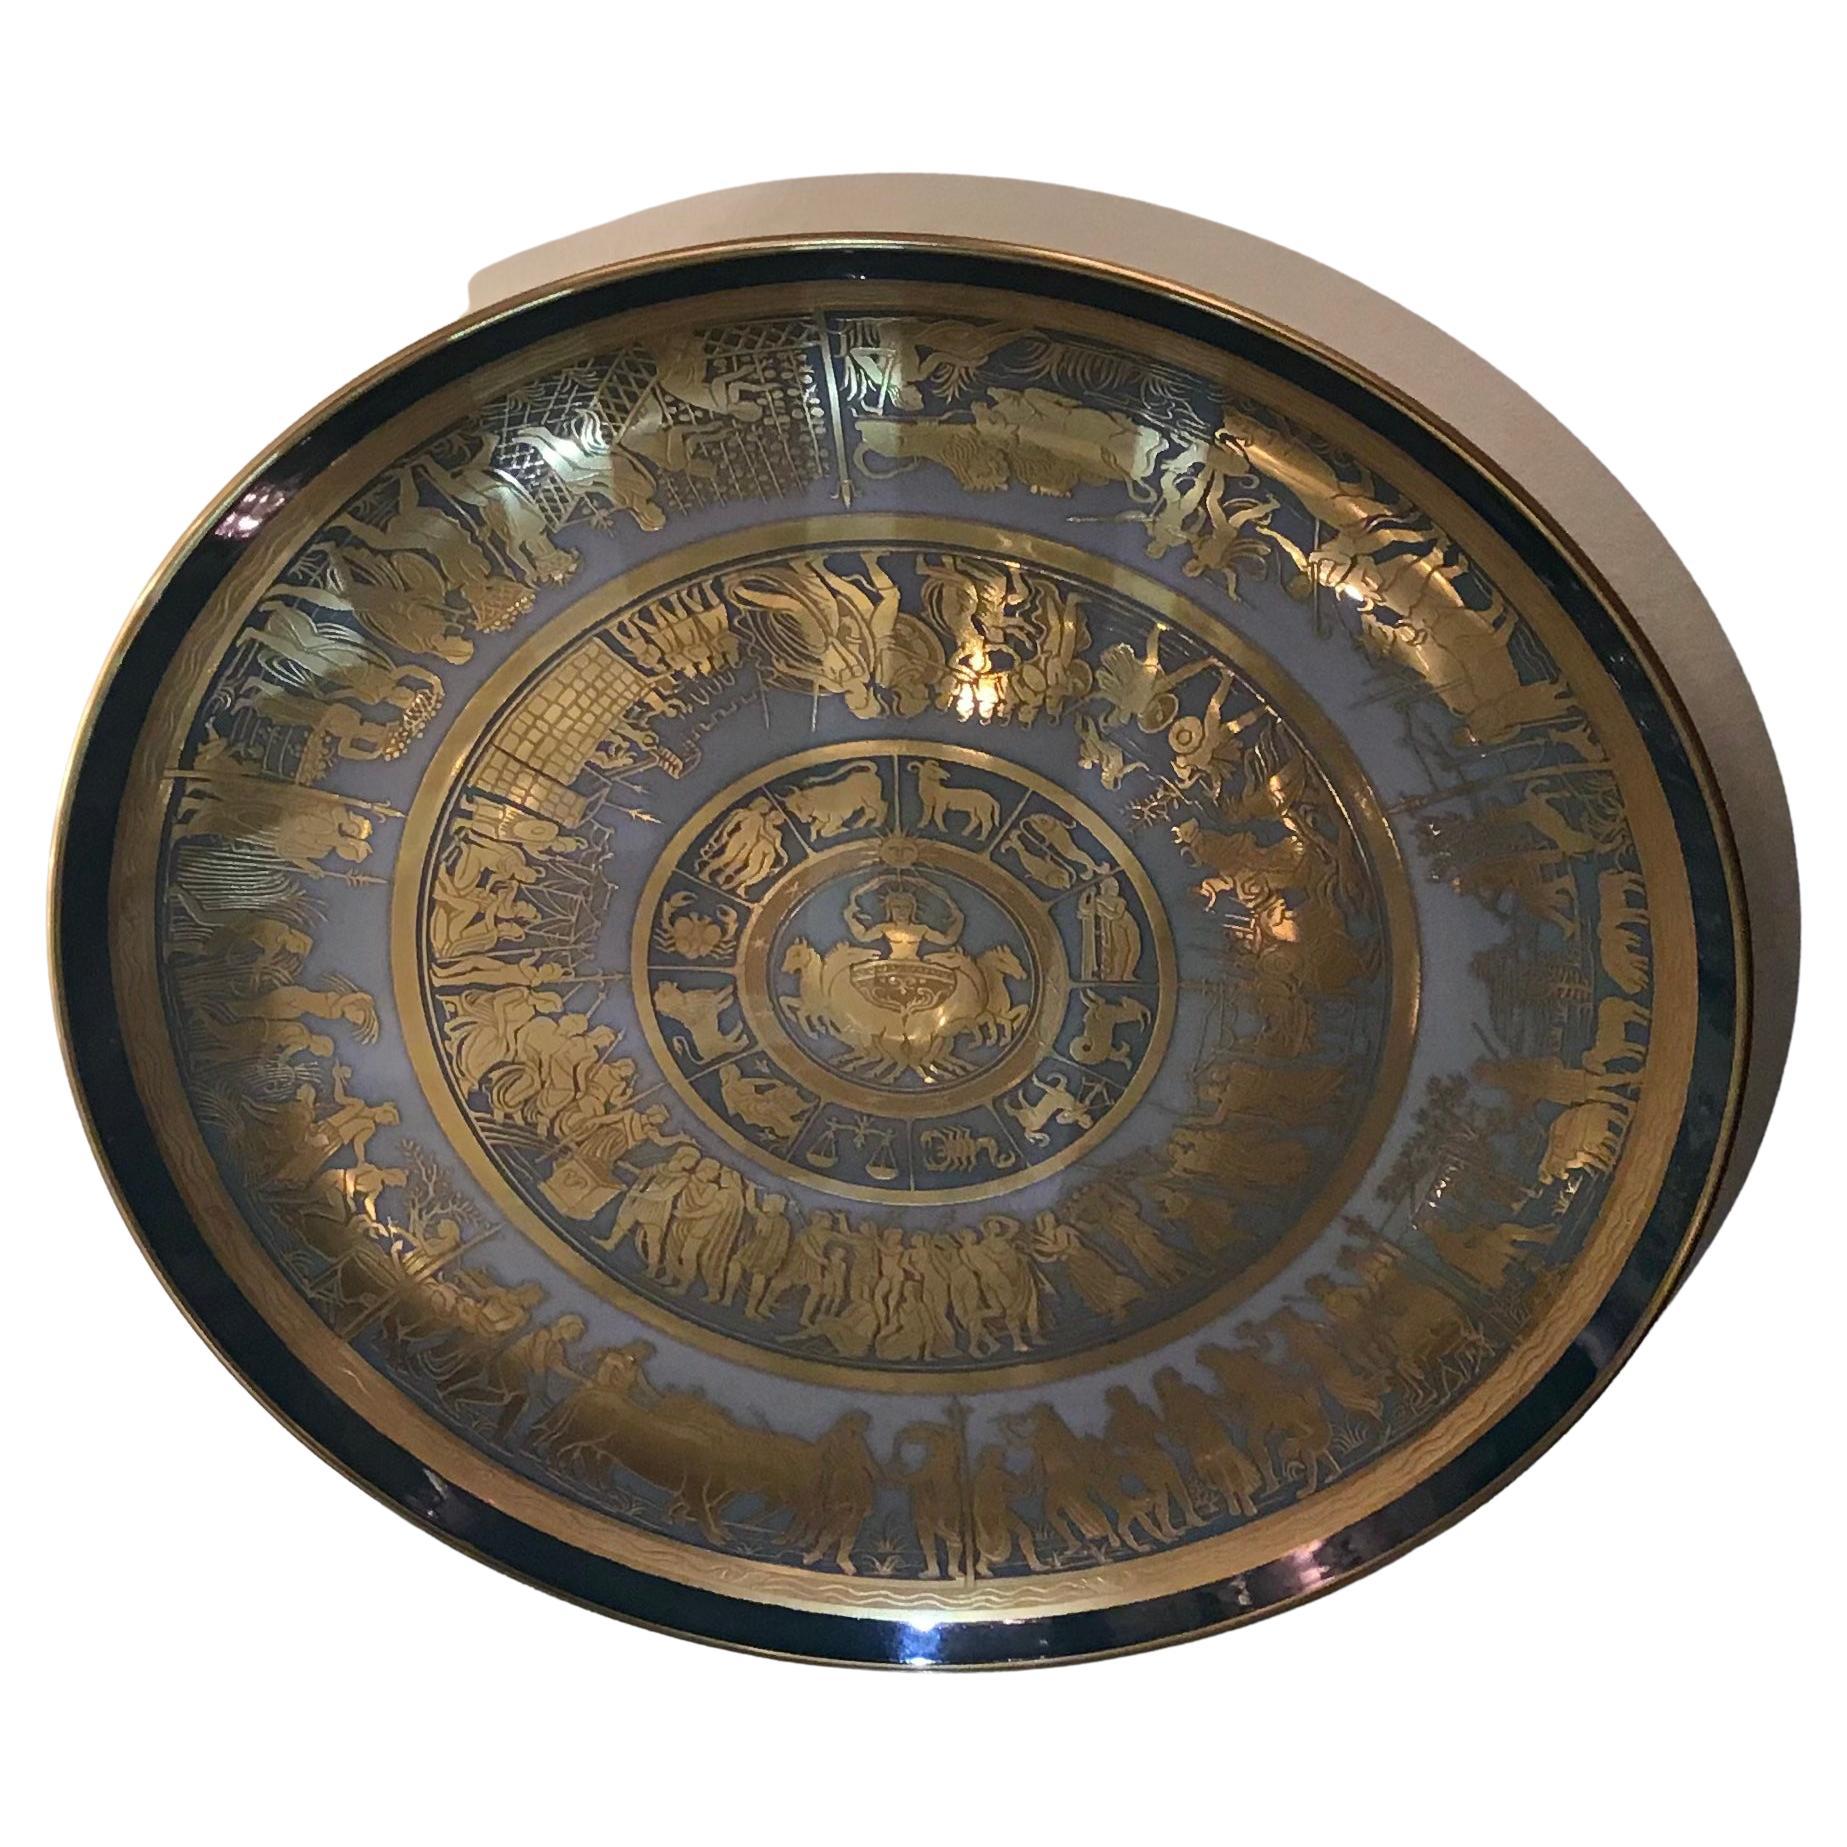 Morbelli Porcelain “Scudo di AchilleWall Plates Worked with Pure Gold 1960 Italy For Sale